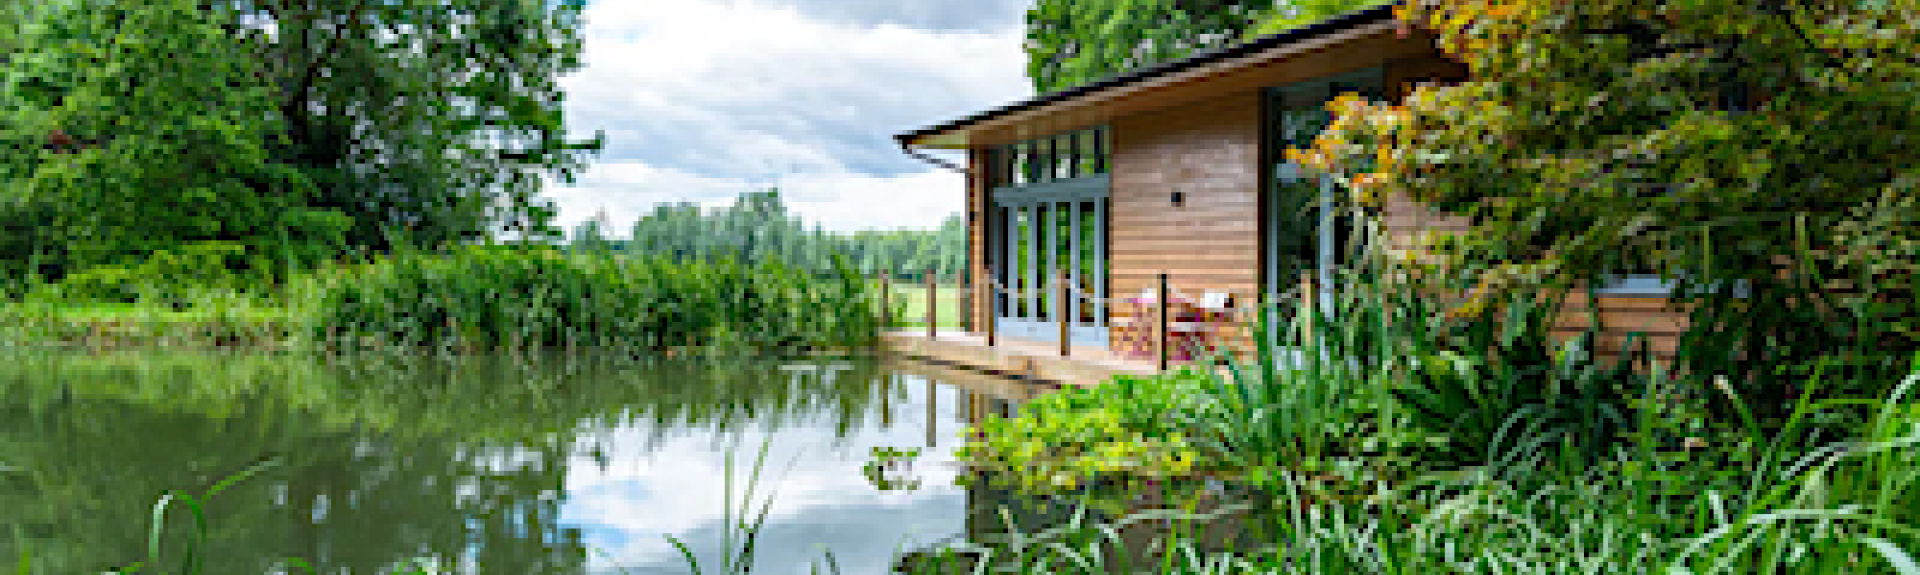 A pine lodge nestles in woodland overlooking a small lake on which ducks are swimming.